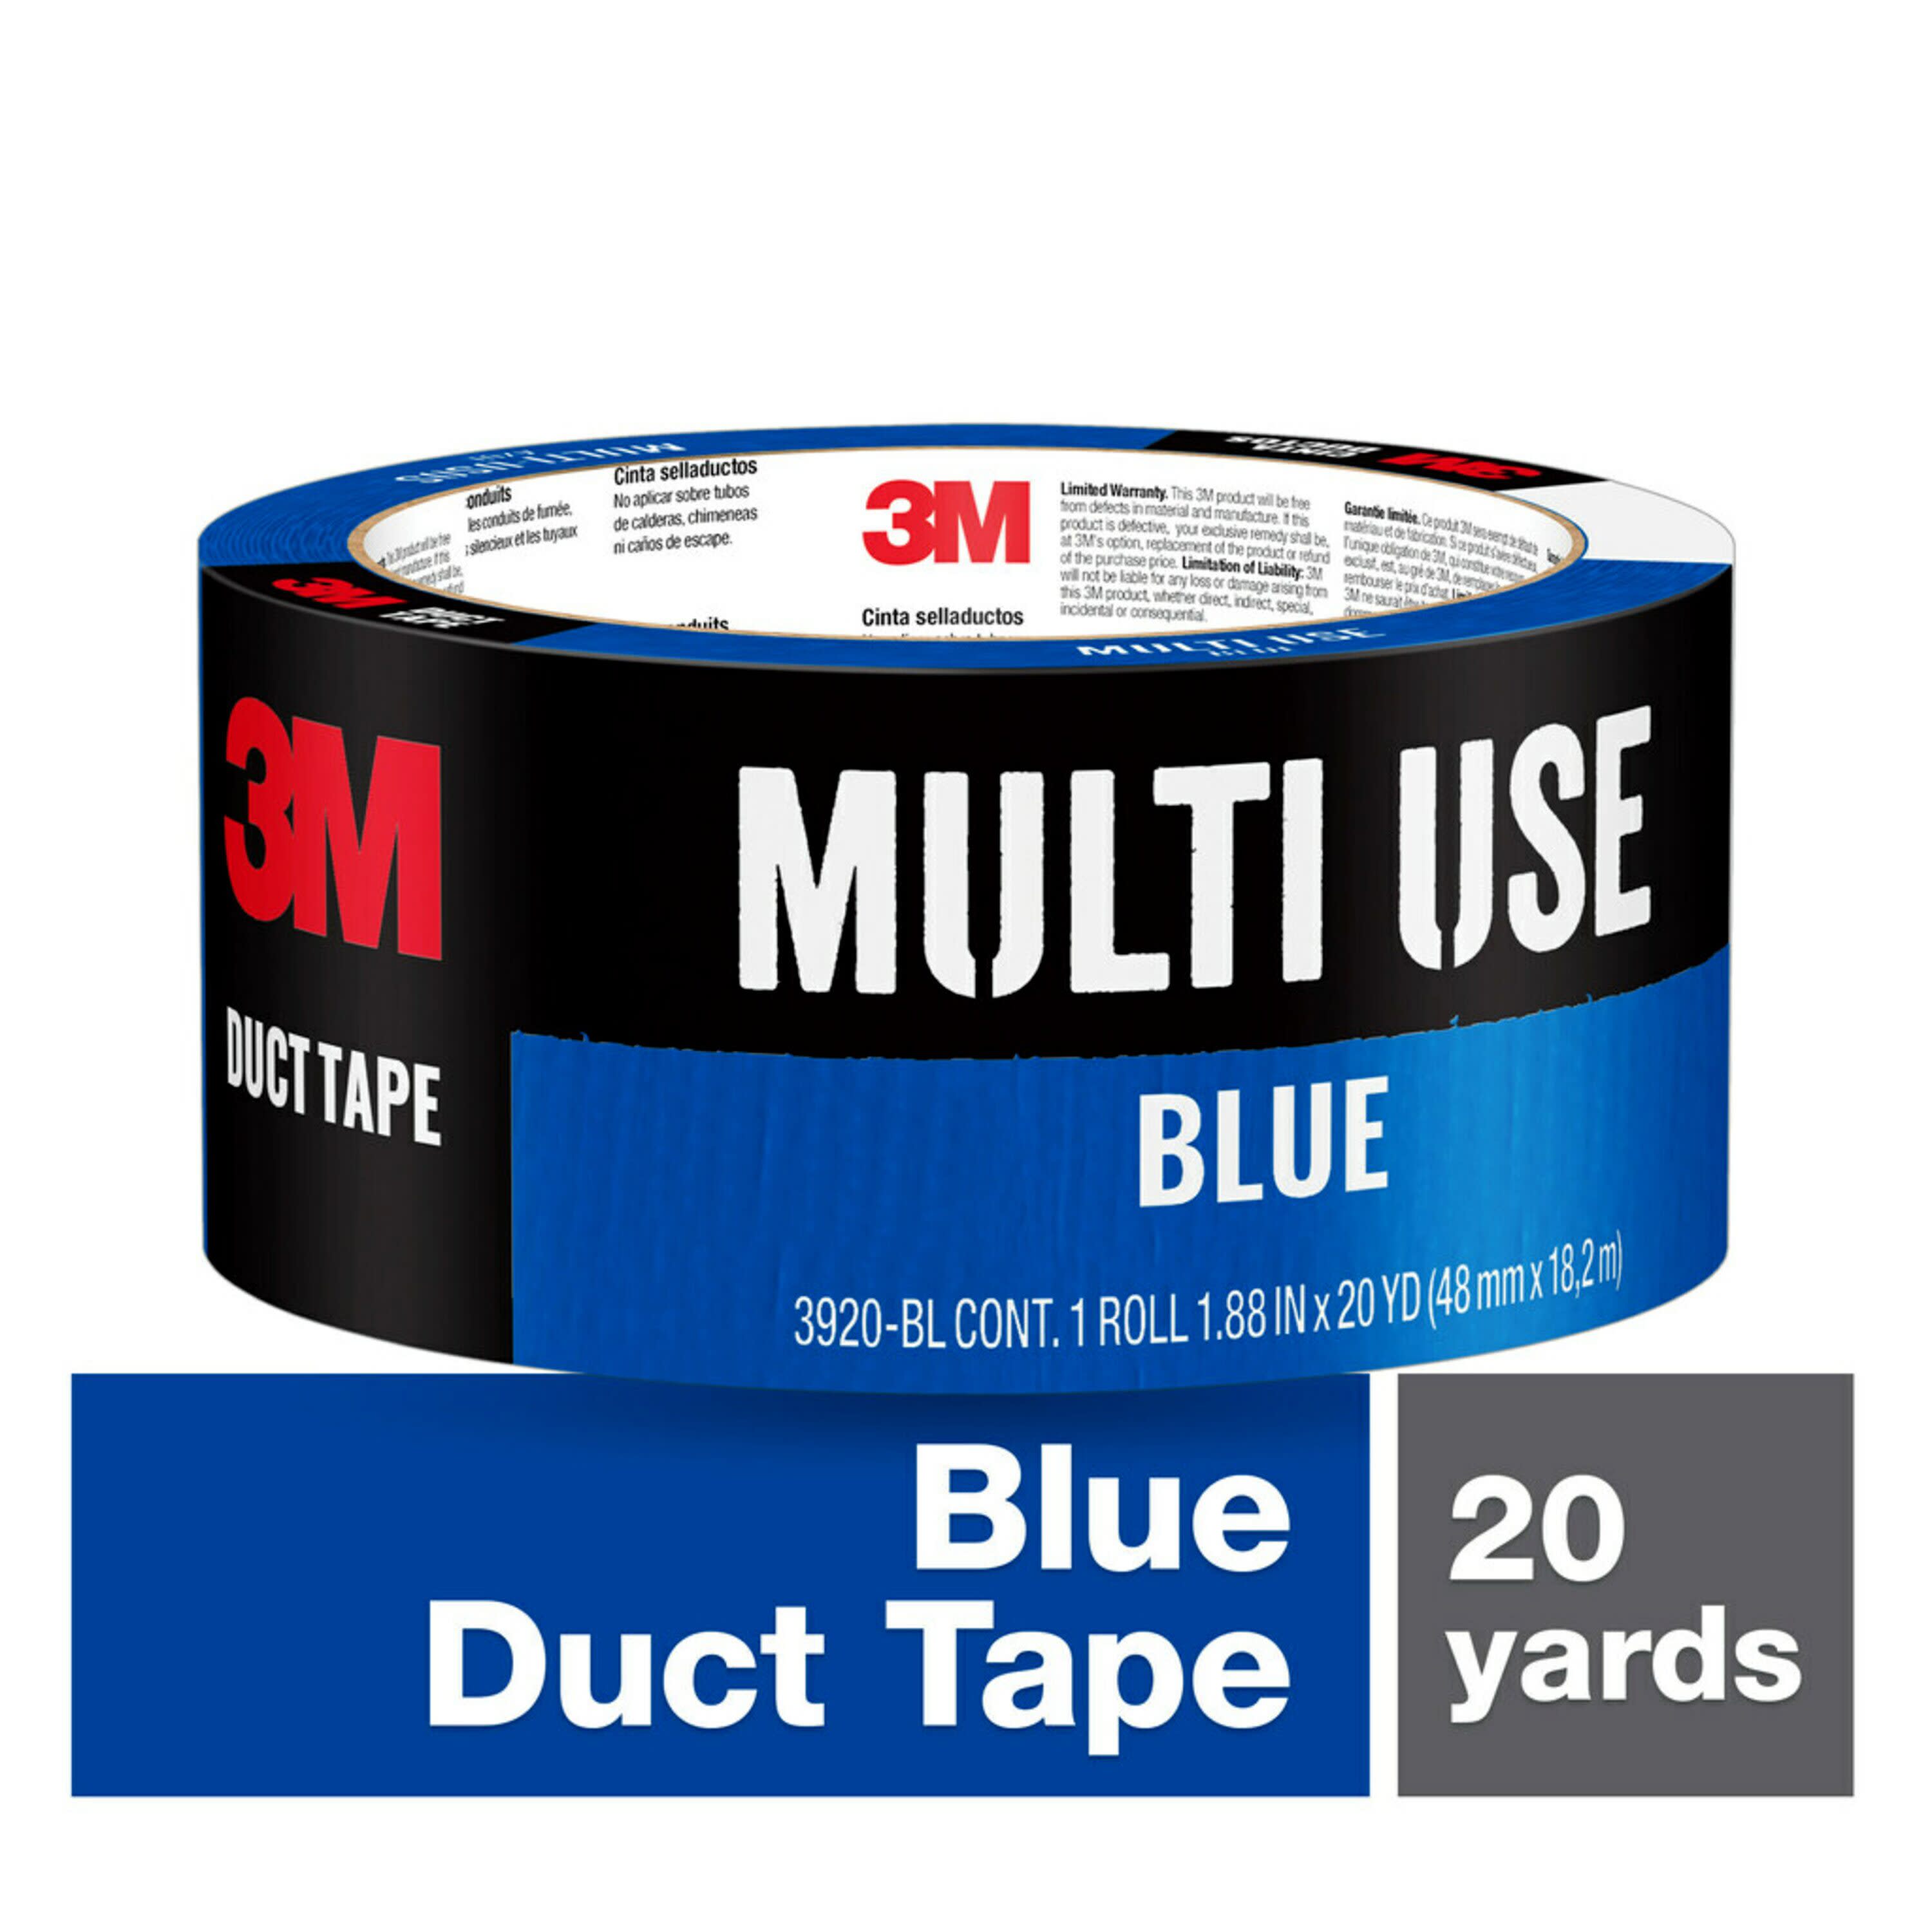 GAFFER TAPE (White) - 2in. x 35 yard - Better than Duct Tape